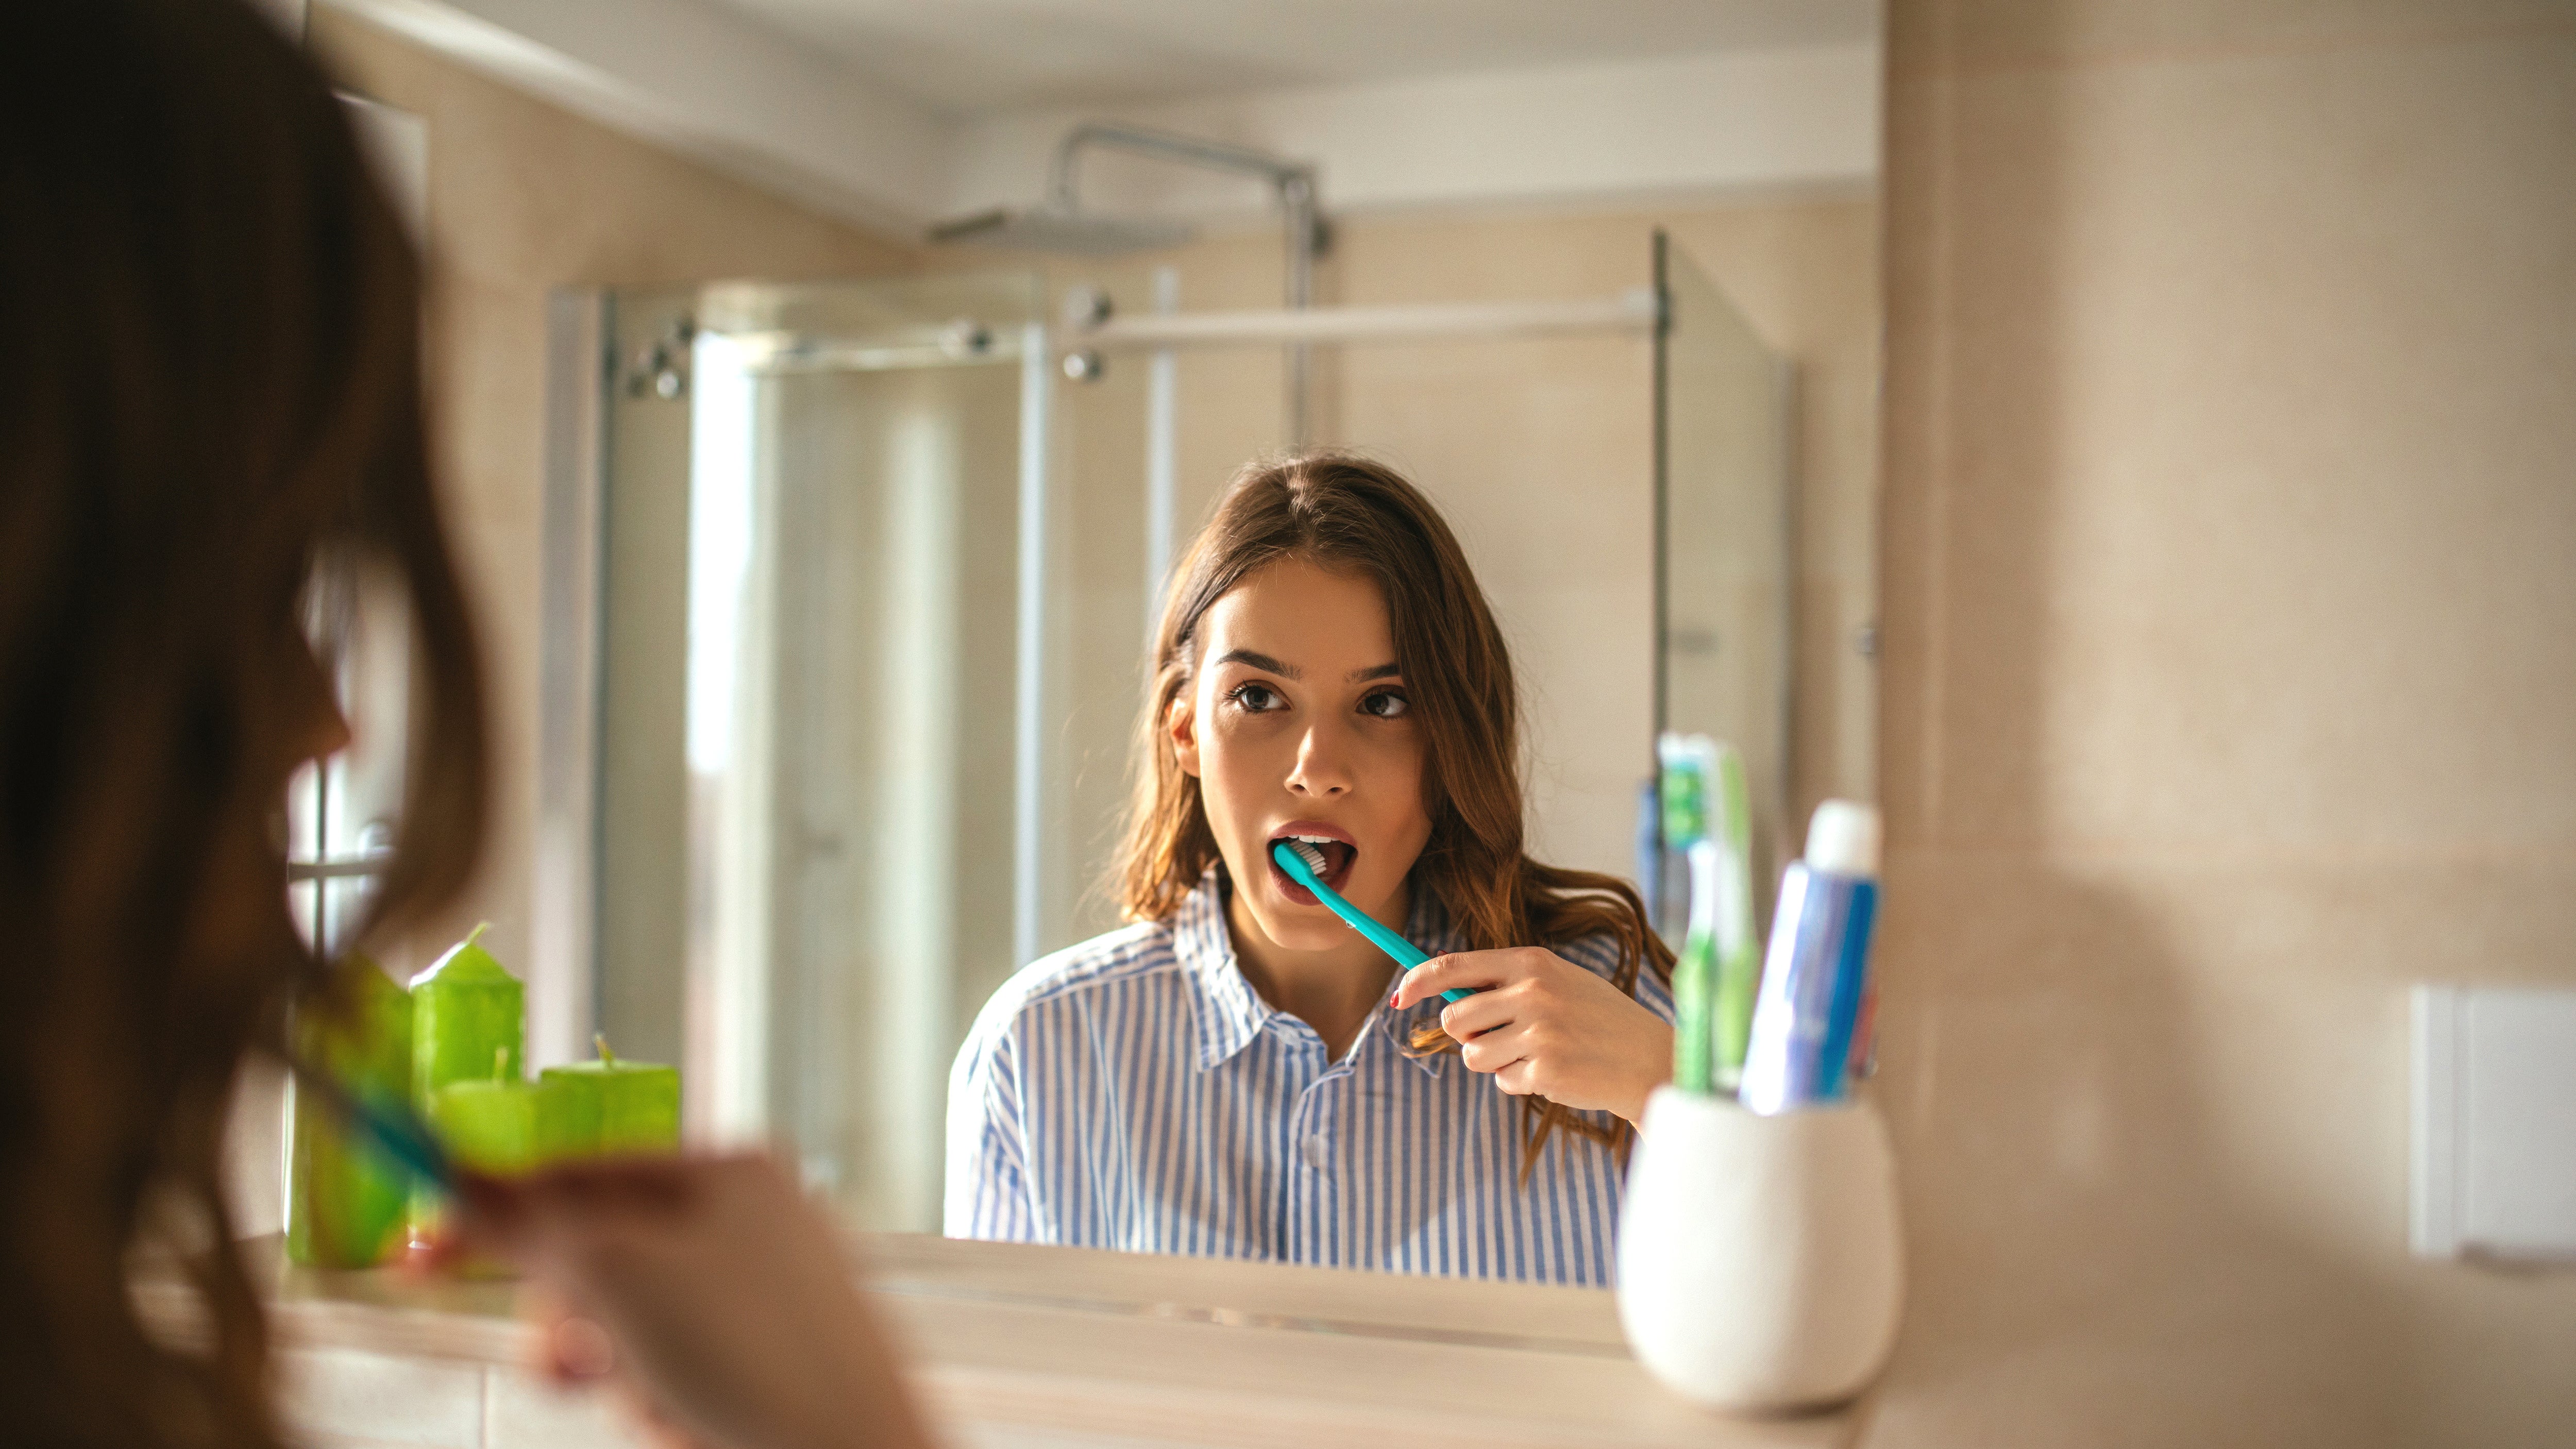 Turn Off The Water While You Brush Your Teeth